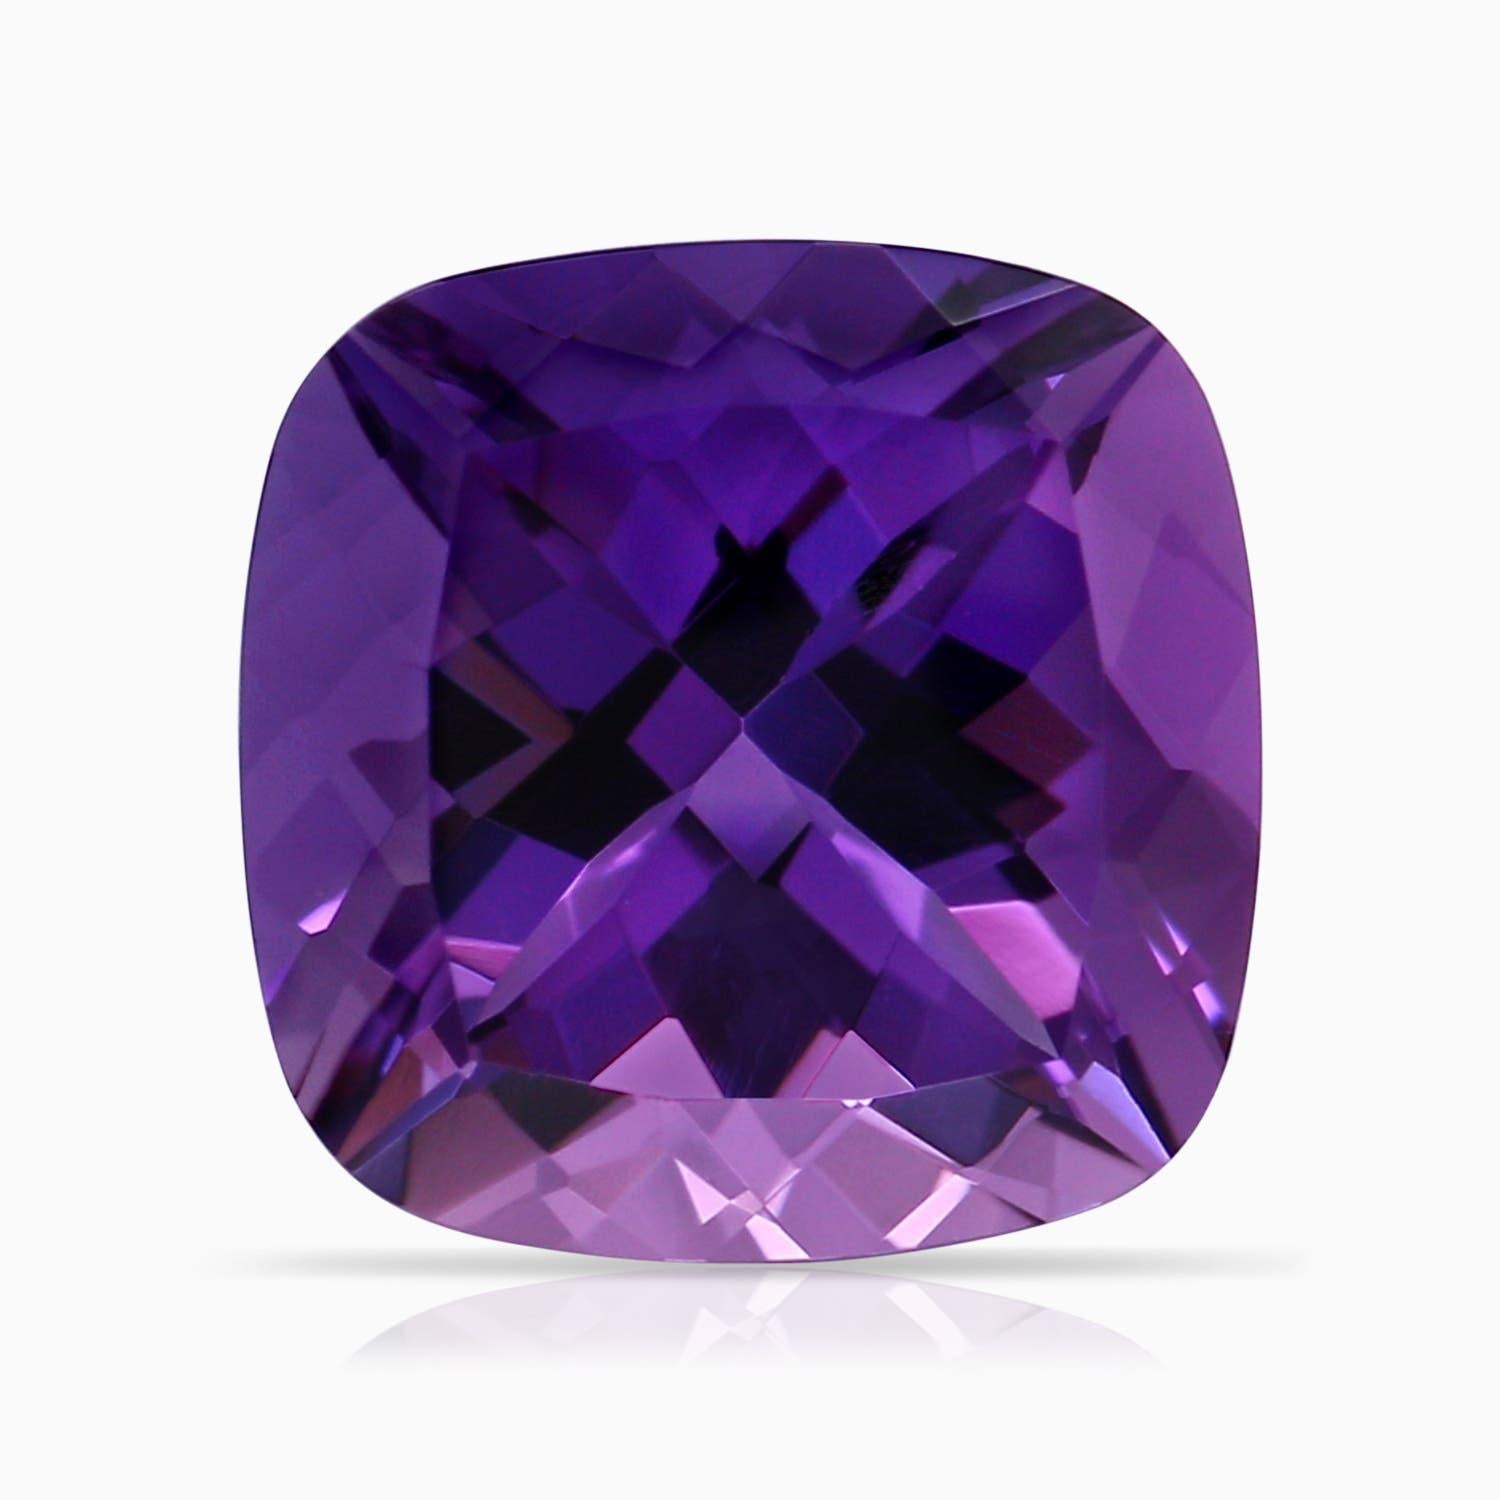 For Sale:  ANGARA 3-Stone GIA Certified Cushion Amethyst Ring in Yellow Gold with Diamonds 6